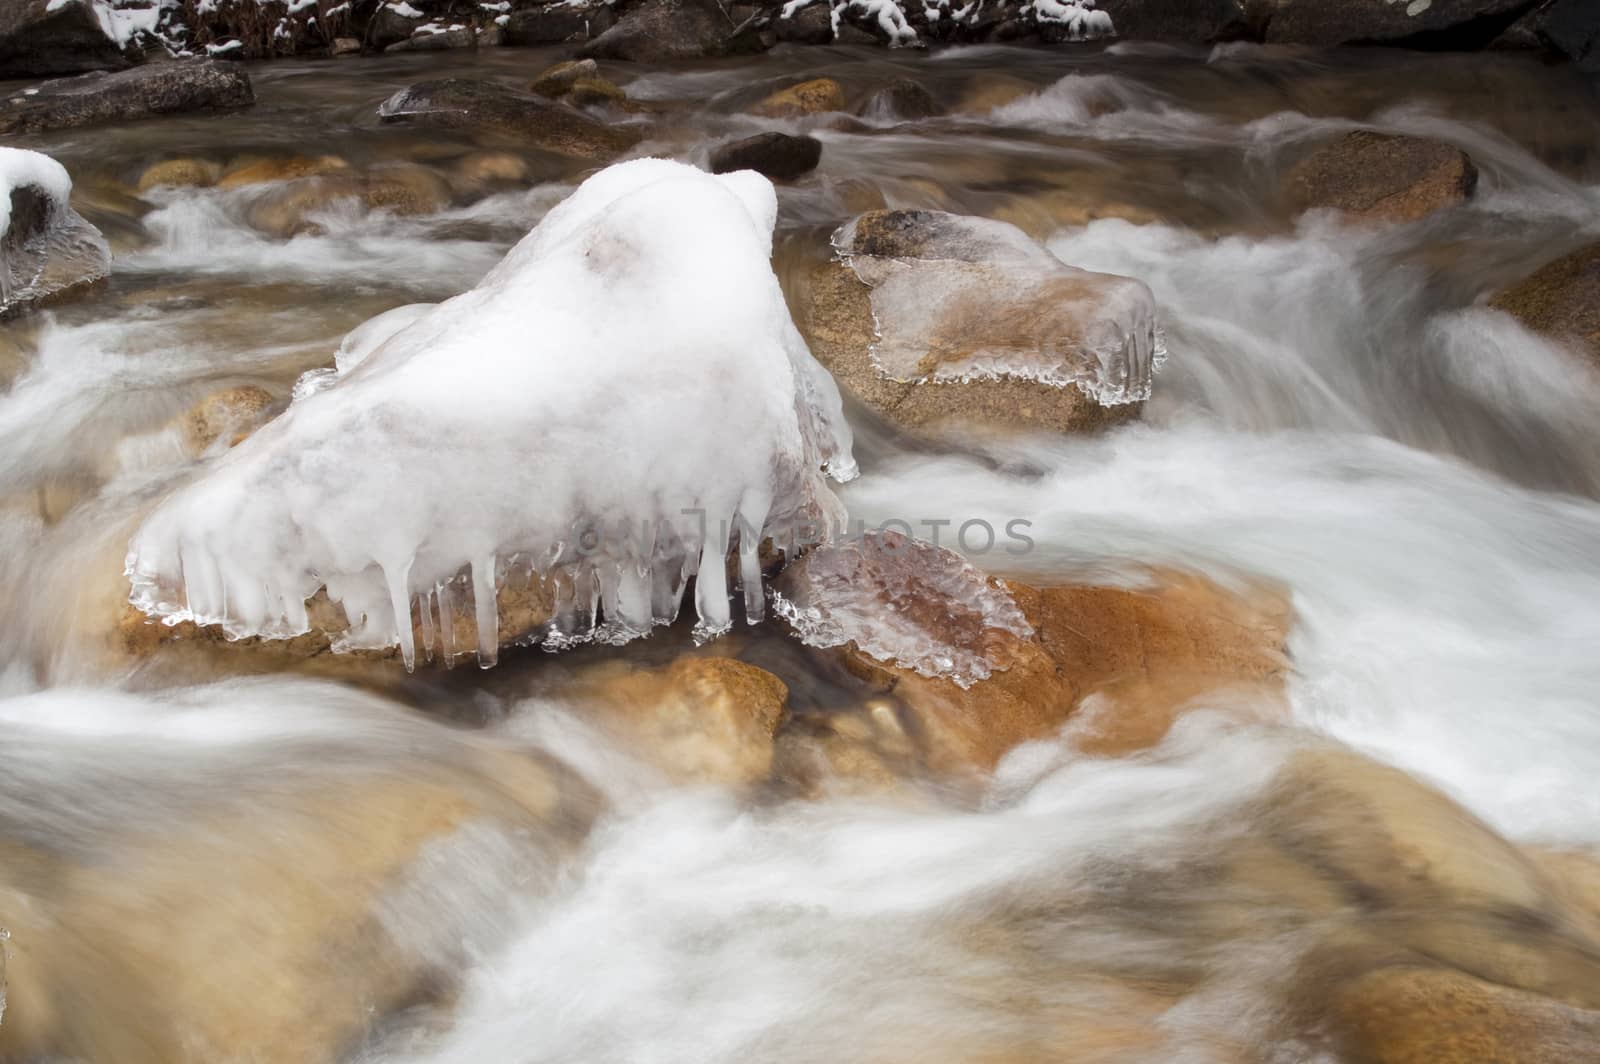 White water moves over large rocks in an Idaho wilderness stream